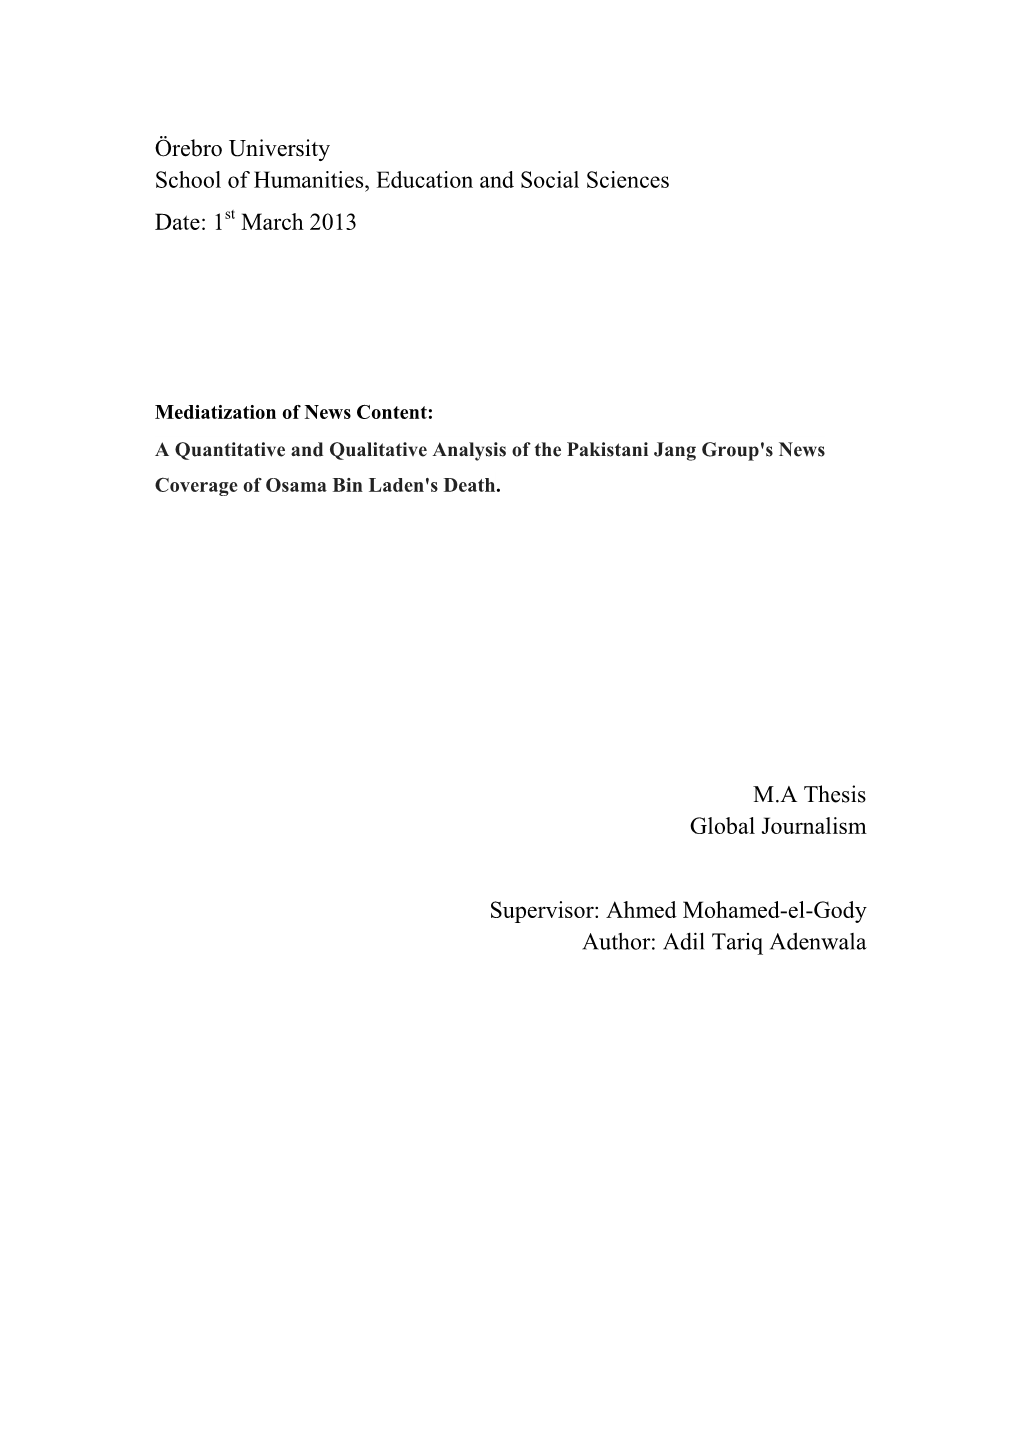 1 March 2013 MA Thesis Global Journalism